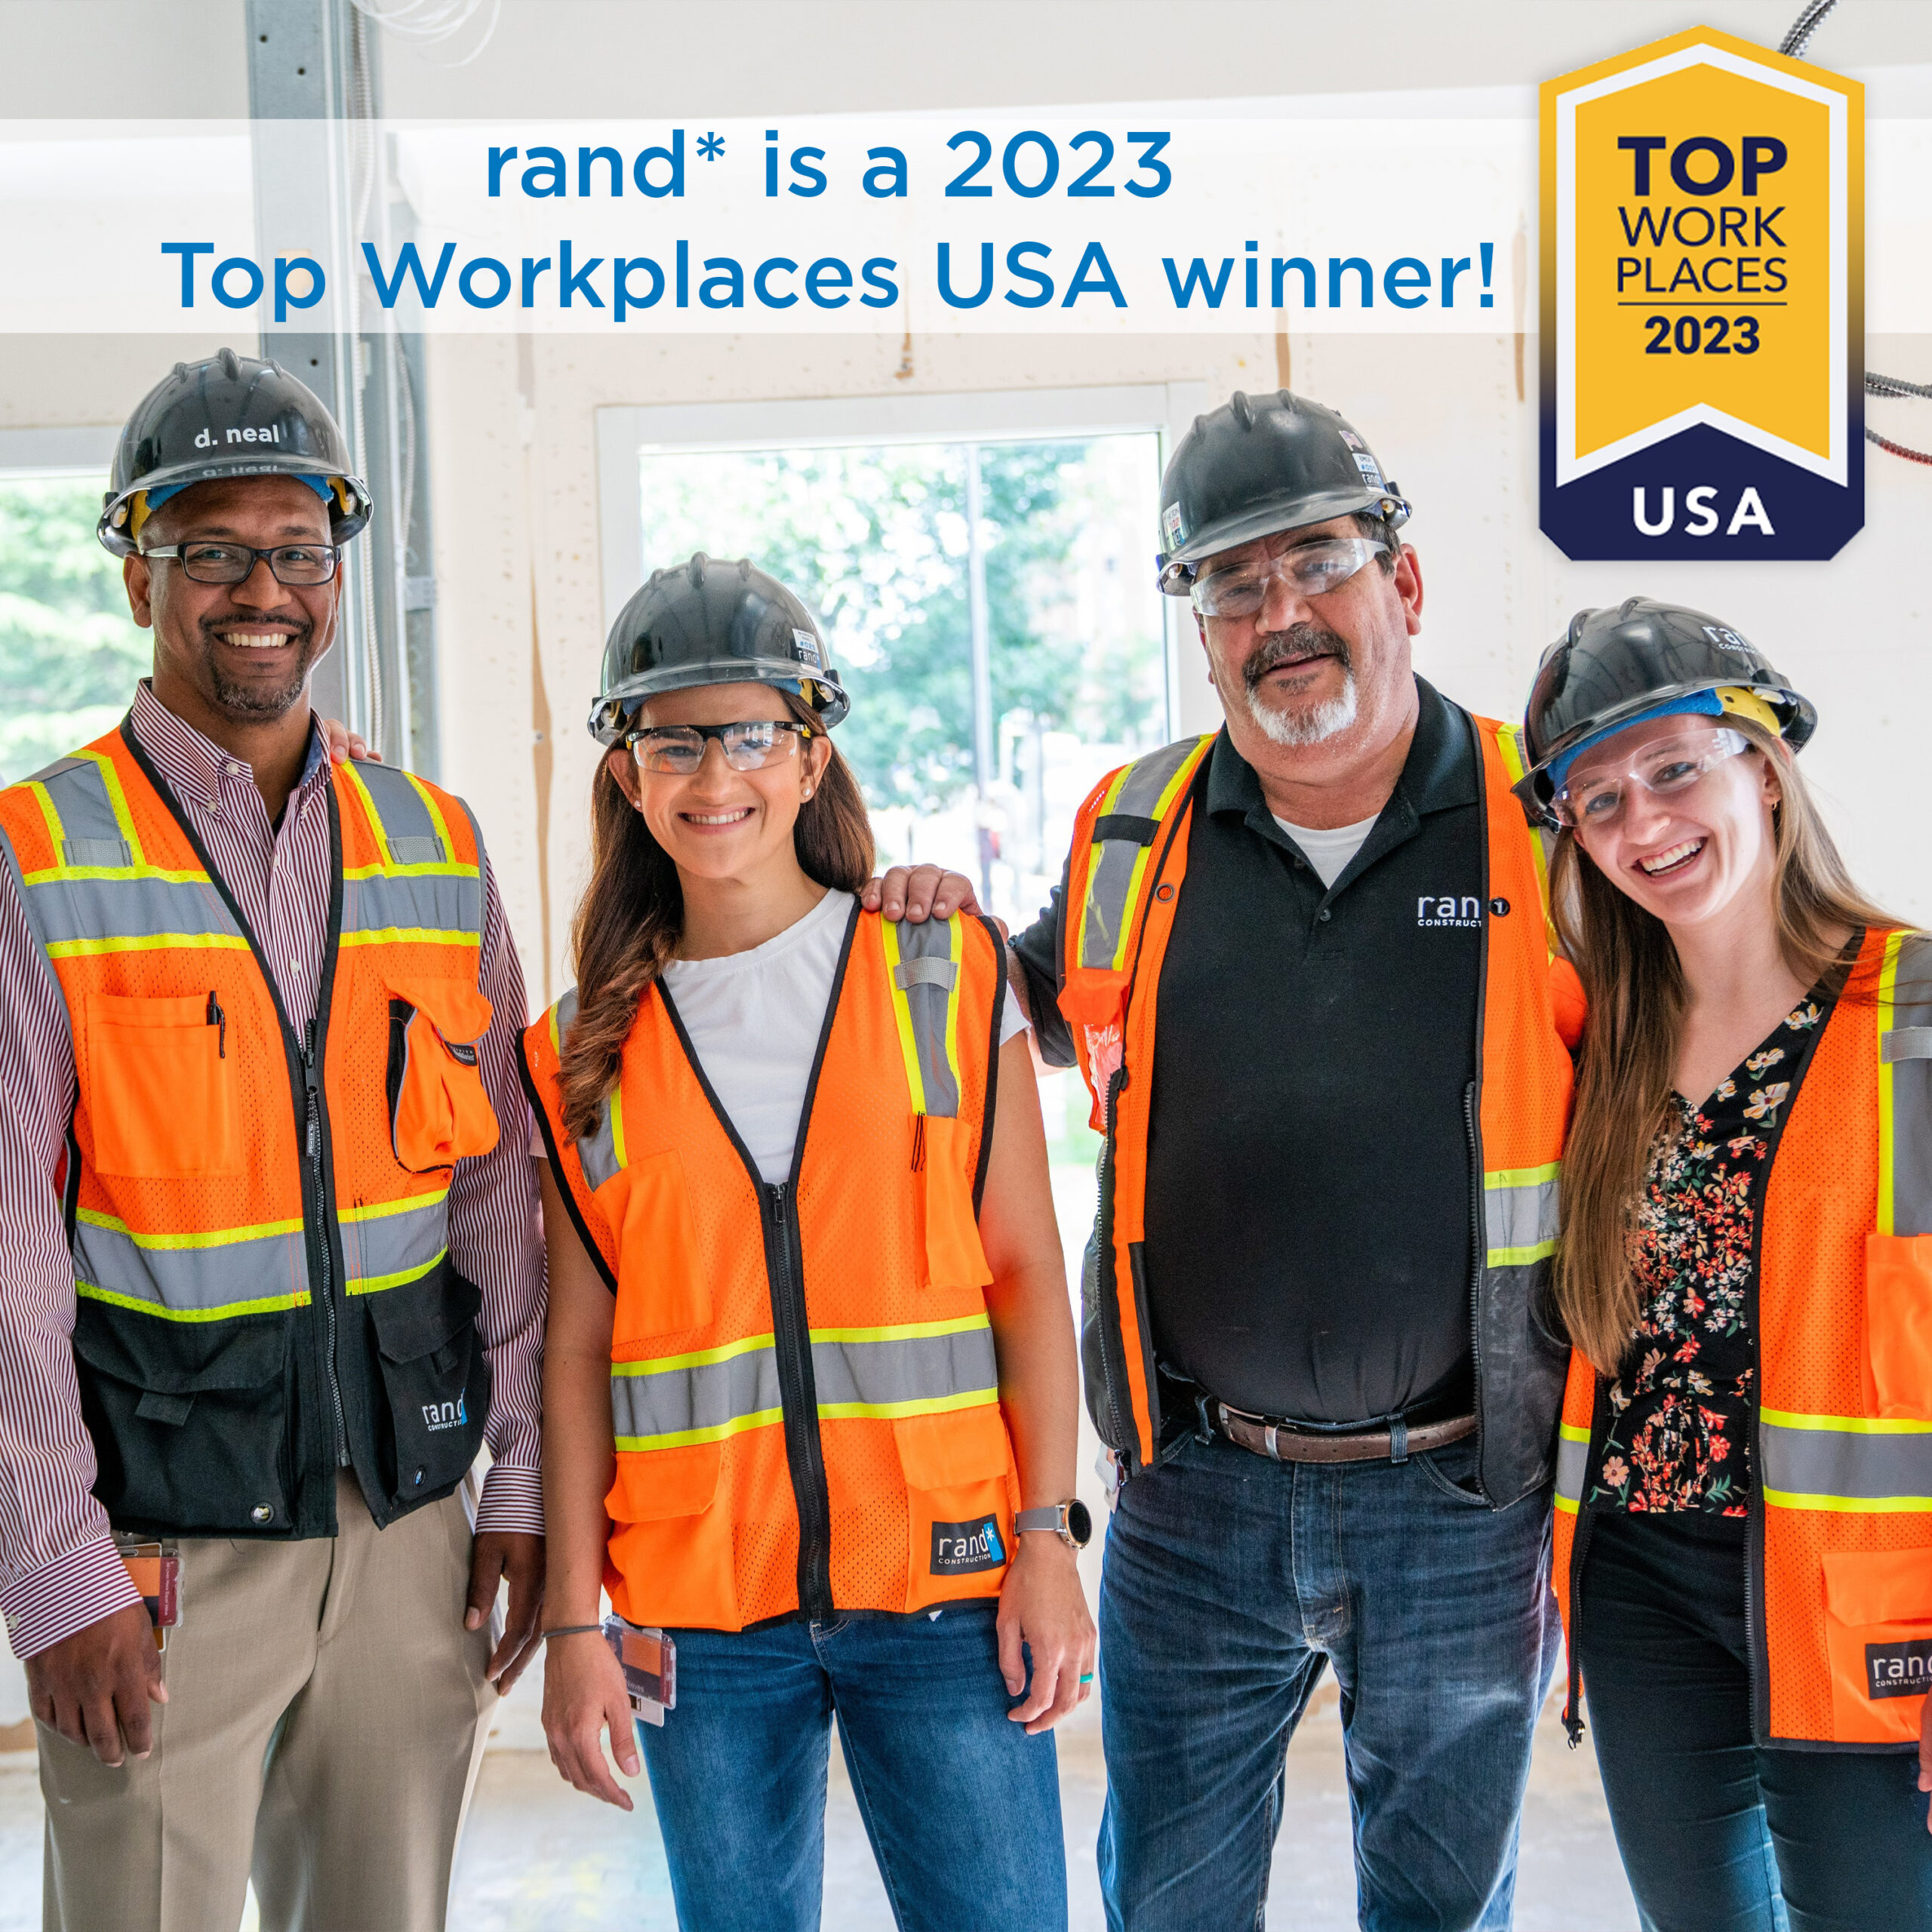 rand* wins 2023 Top Workplaces USA rand construction corporation